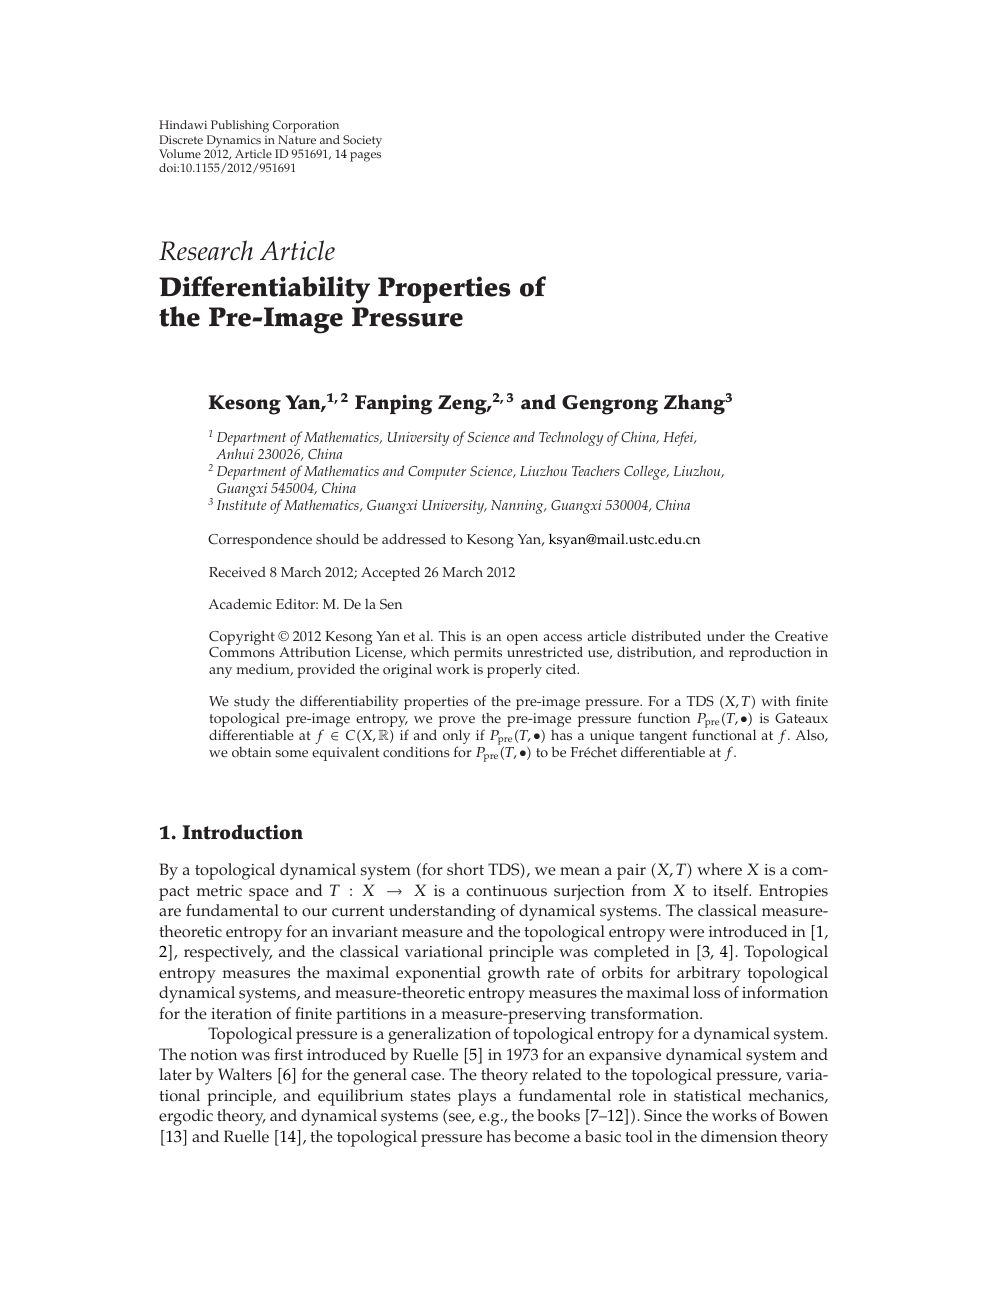 Differentiability Properties Of The Pre Image Pressure Topic Of Research Paper In Mathematics Download Scholarly Article Pdf And Read For Free On Cyberleninka Open Science Hub